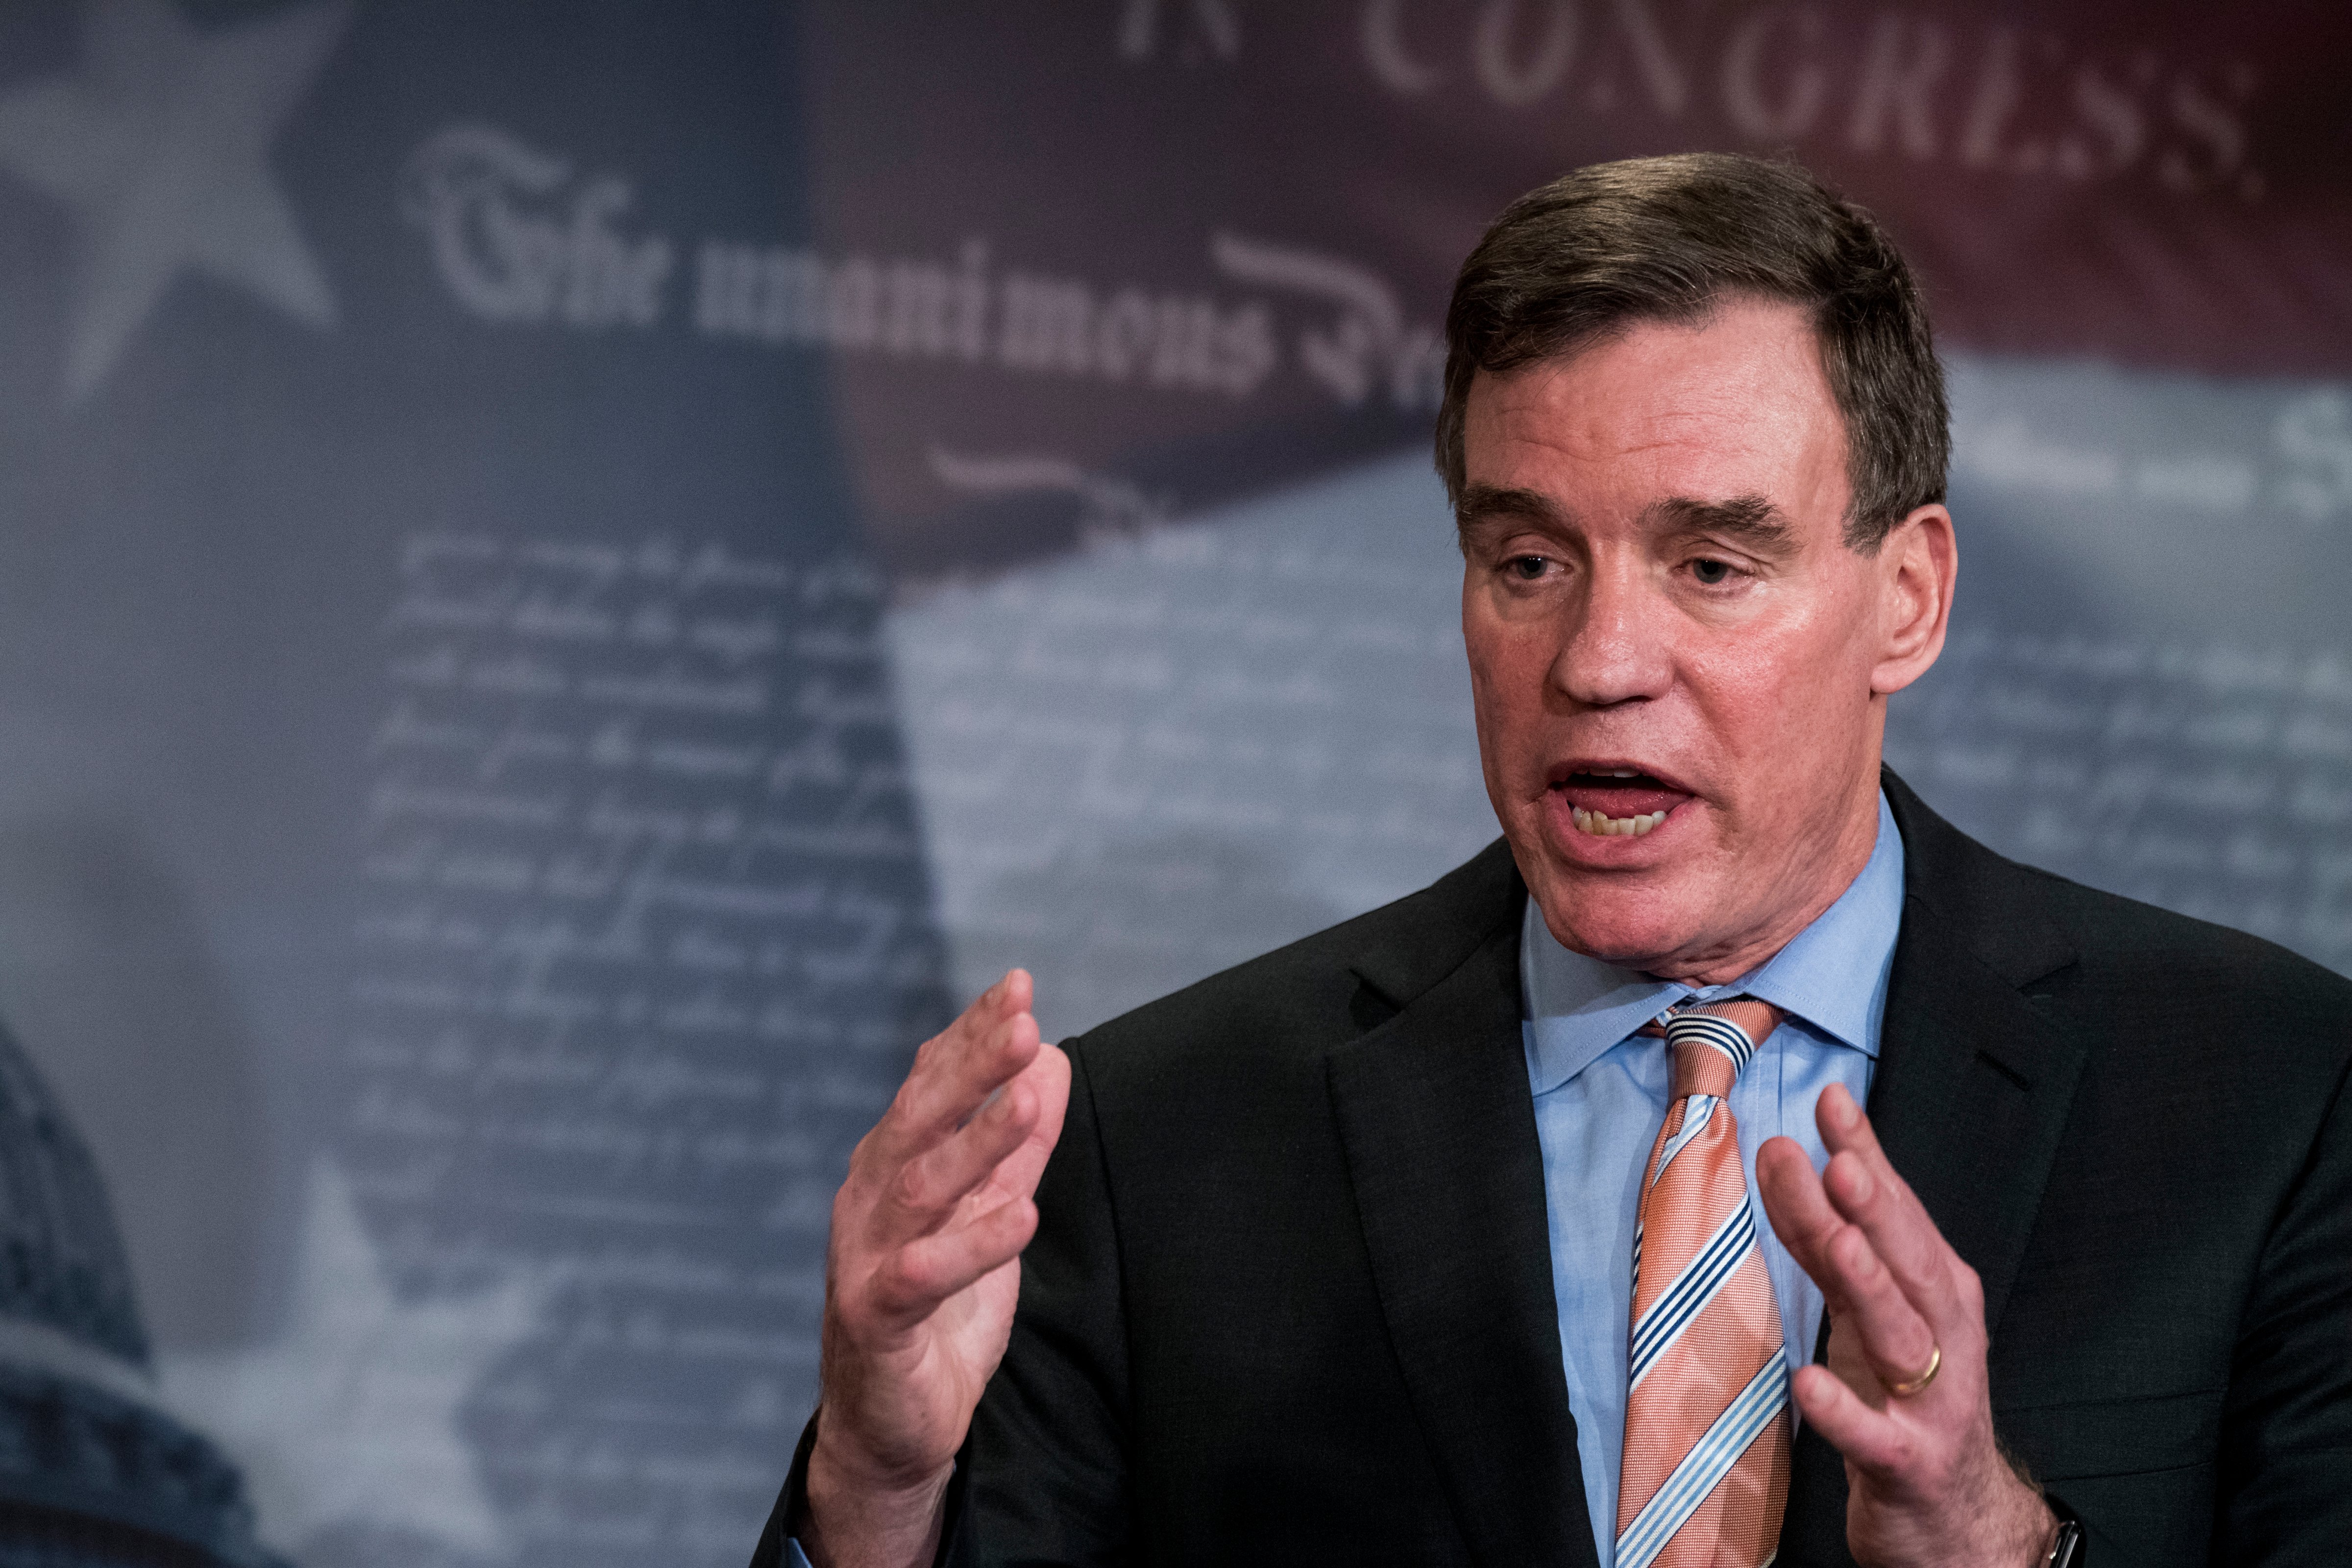 Senate Intelligence Vice Chair Mark Warner, D-Va., speaks at a news conference about the investigation into Russian meddling at the election with Senate Intelligence Chairman Richard Burr on Wednesday, March 29, 2017. (Bill Clark—CQ-Roll Call,Inc.)